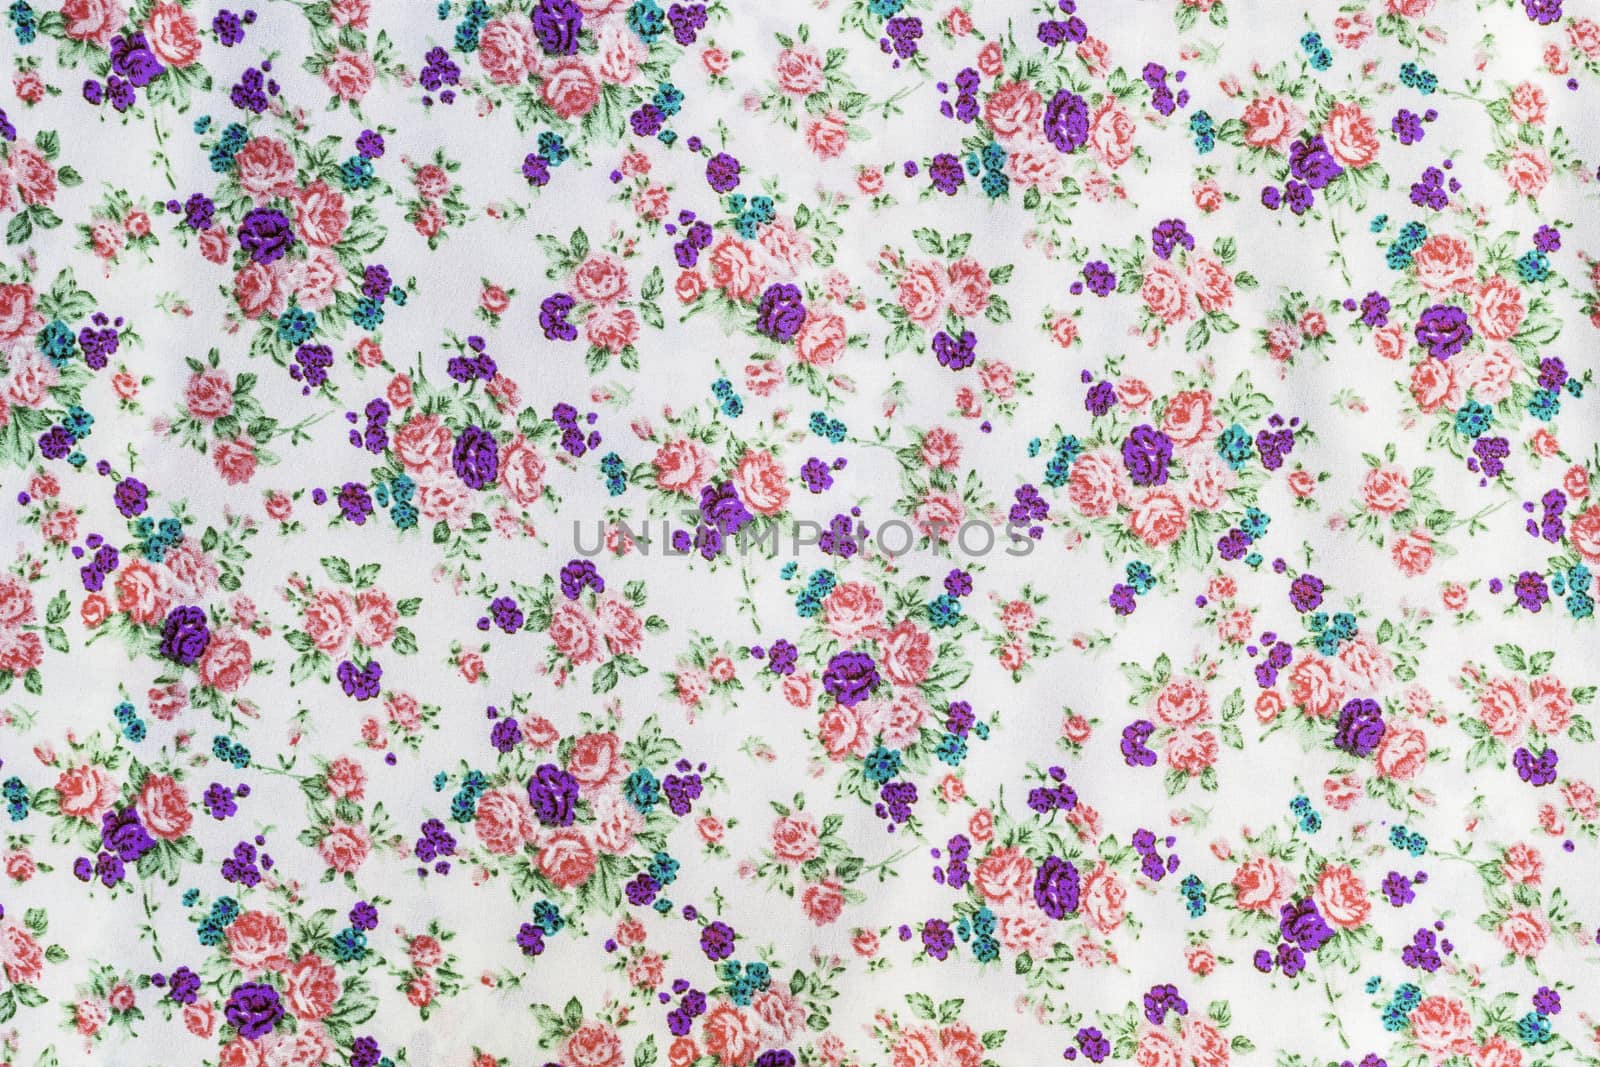 Flowers and leaf on fabric pattern by manusy